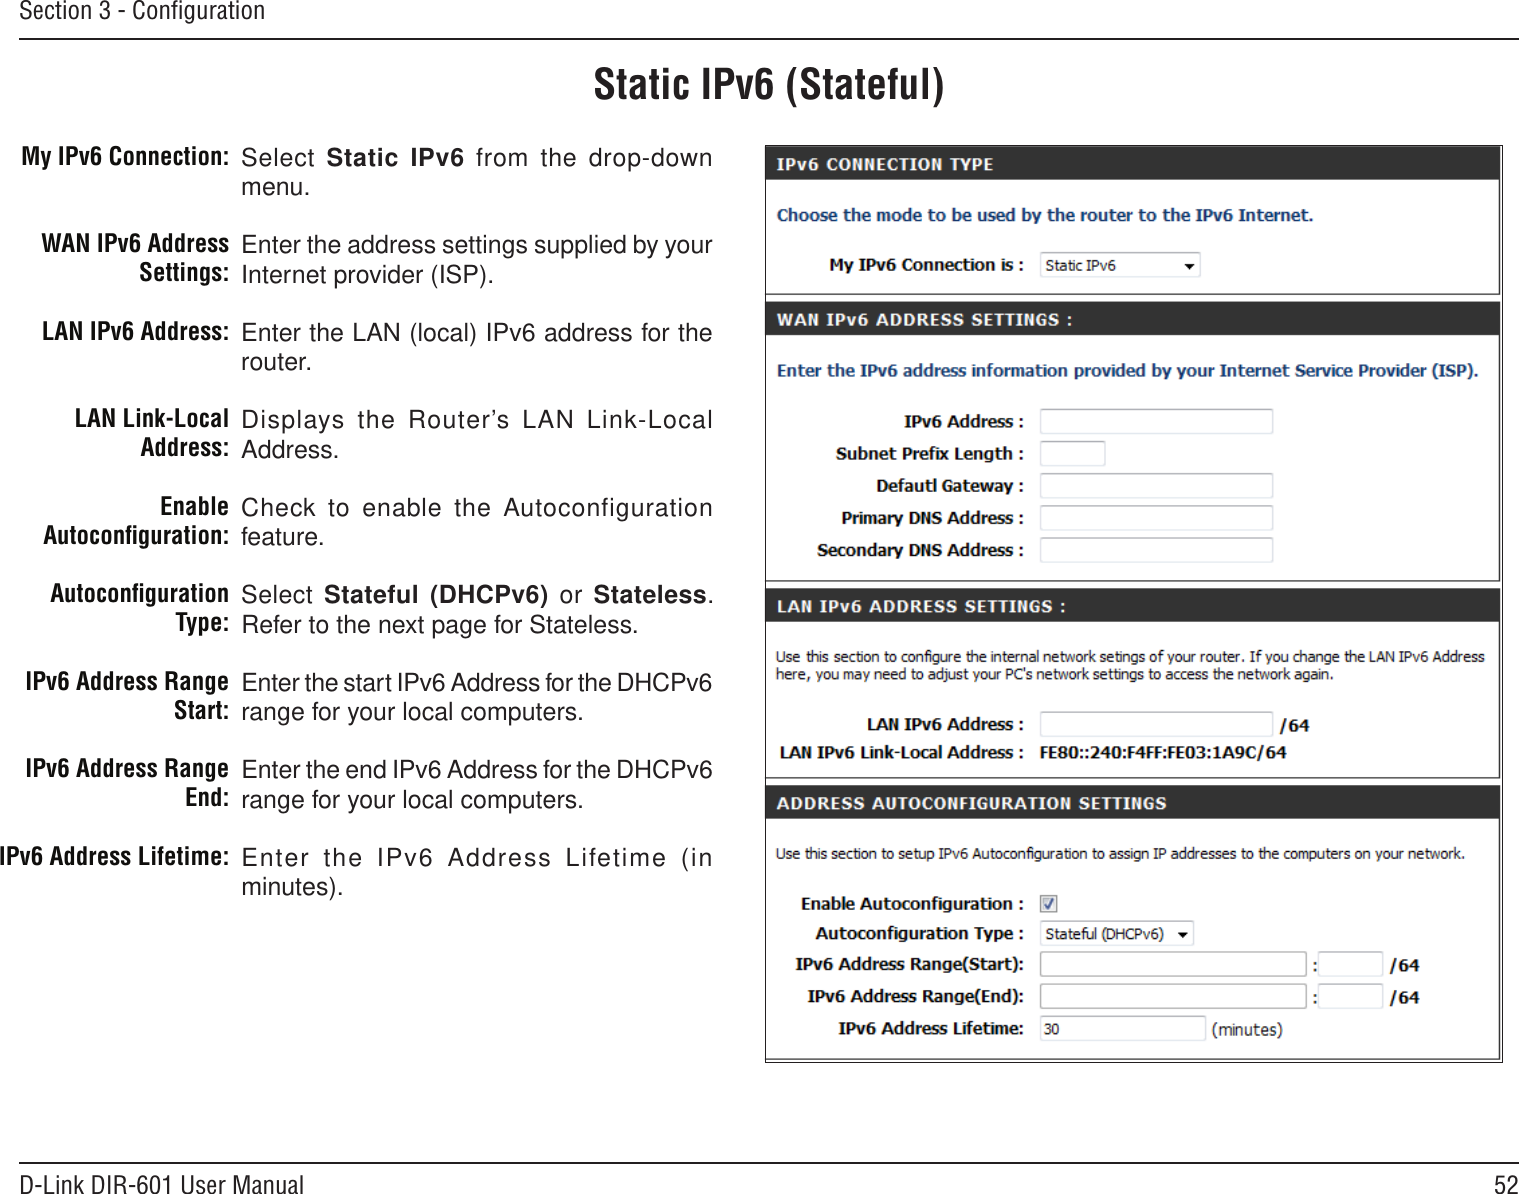 52D-Link DIR-601 User ManualSection 3 - ConﬁgurationStatic IPv6 (Stateful)Select Static IPv6 from the  drop-down menu.Enter the address settings supplied by your Internet provider (ISP). Enter the LAN (local) IPv6 address for the router. Displays the Router’s LAN  Link-Local Address.Check to enable the Autoconfiguration feature.Select Stateful (DHCPv6)  or  Stateless. Refer to the next page for Stateless.Enter the start IPv6 Address for the DHCPv6 range for your local computers.Enter the end IPv6 Address for the DHCPv6 range for your local computers.Enter  the  IPv6  Address  Lifetime  (in minutes).My IPv6 Connection:WAN IPv6 Address Settings:LAN IPv6 Address:LAN Link-Local Address:Enable Autoconﬁguration:Autoconﬁguration Type:IPv6 Address Range Start:IPv6 Address Range End:IPv6 Address Lifetime: